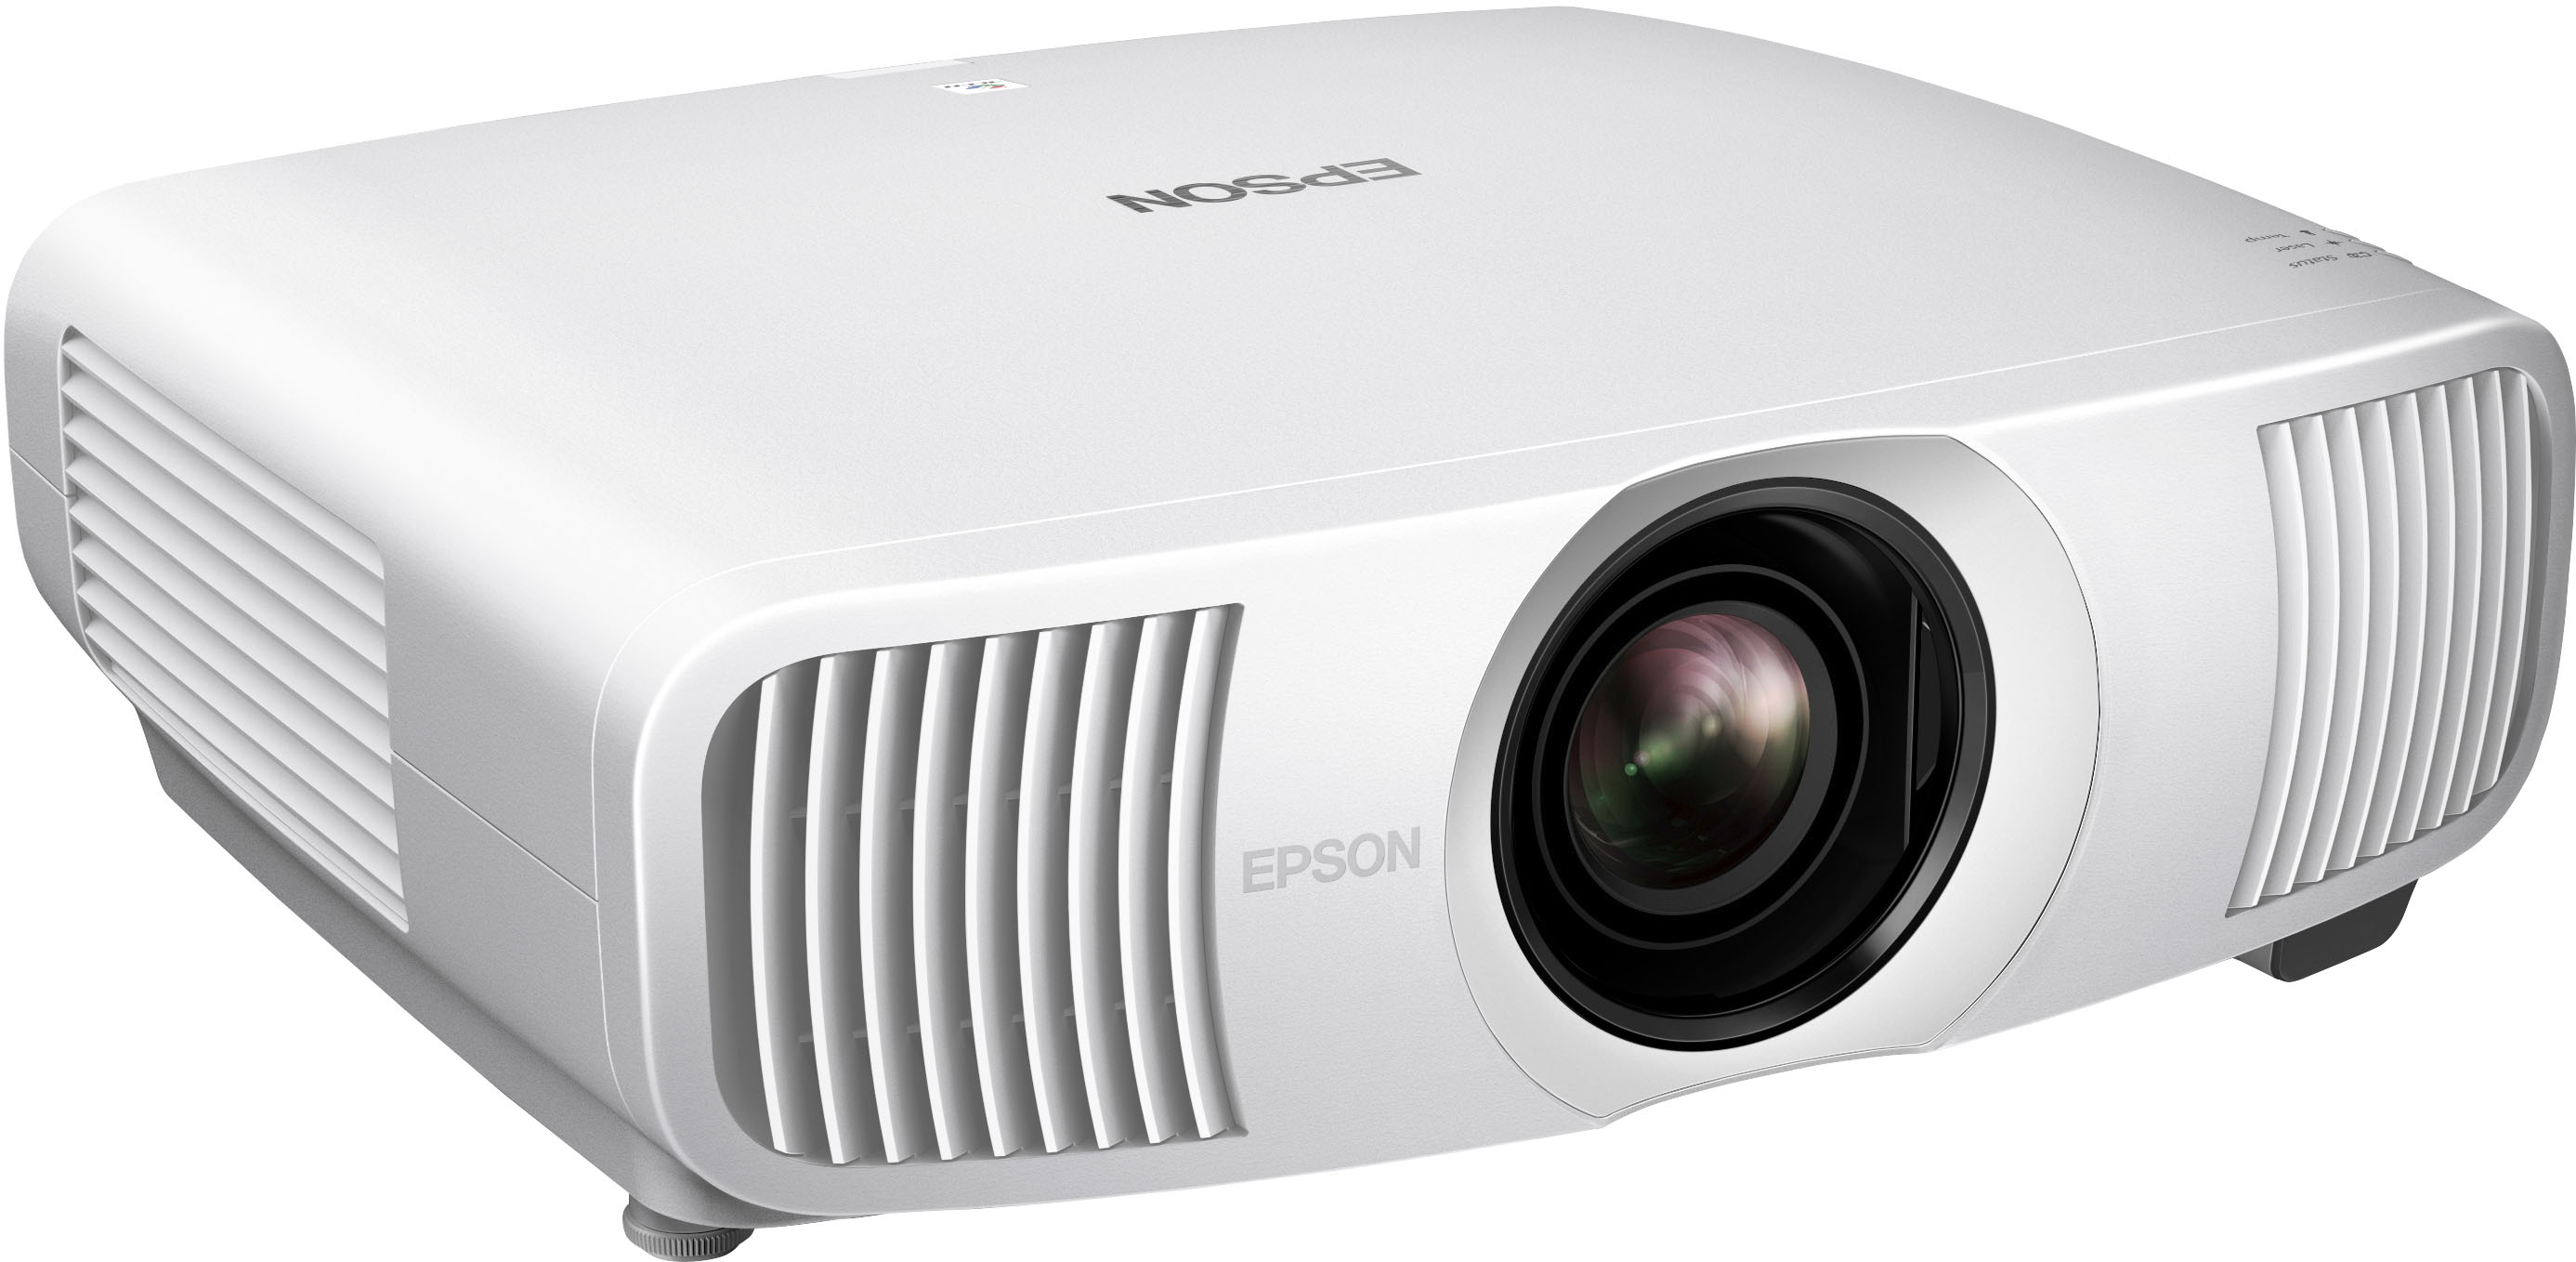 Angle View: Epson - Home Cinema LS11000 4K PRO-UHD Laser Projector, HDR, HDR10+, 2500 lumens, HDMI 2.1, Motorized Lens, 120 Hz, Home Theater - White